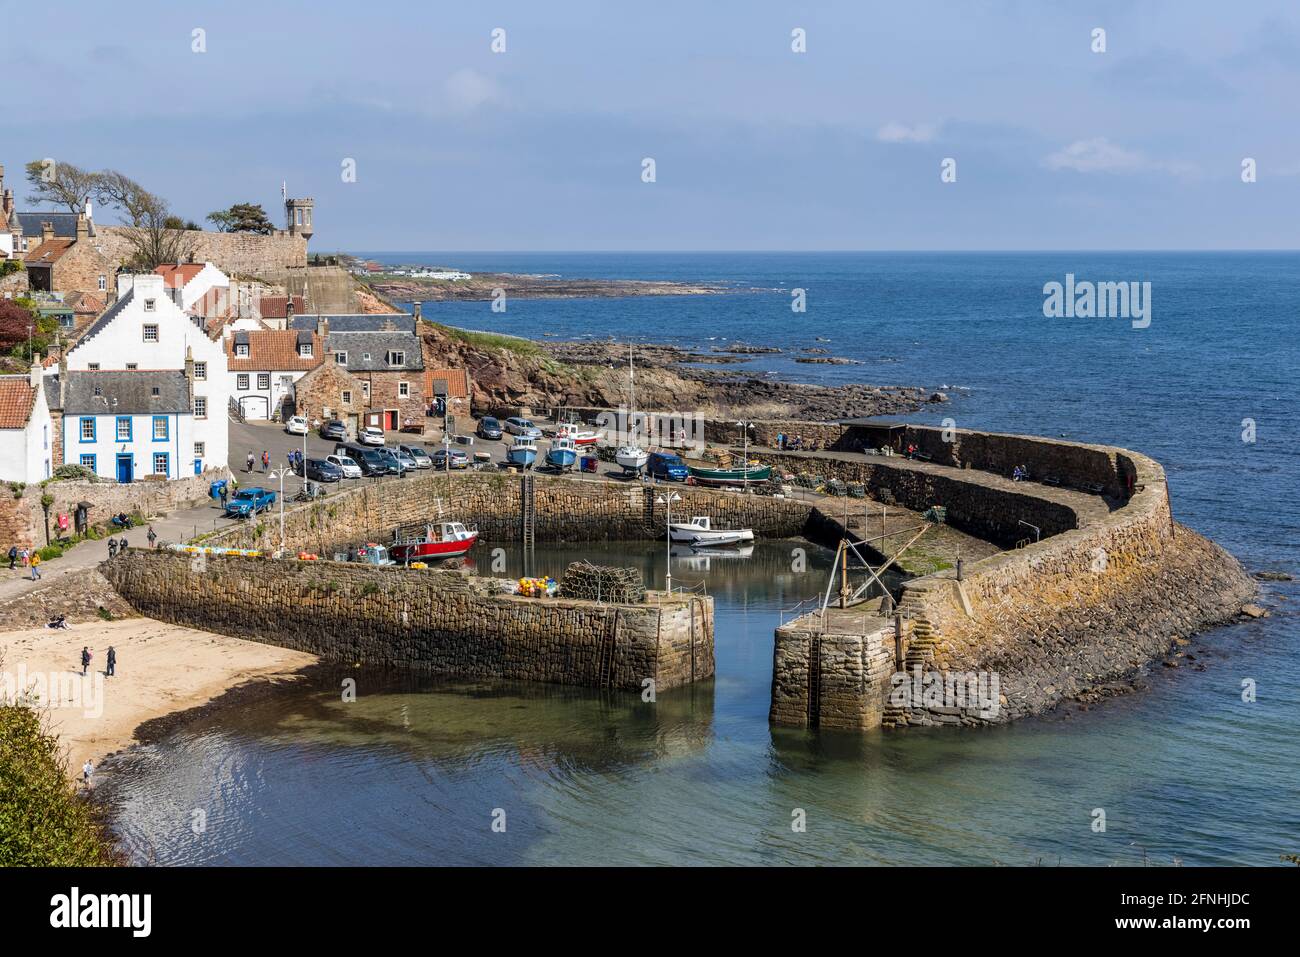 VP1 - High viewpoint to Crail Harbour. Canon EOS R5, RF24-105mm F4 L IS USM at 67mm, ISO 100, 1/200s at f/11. May Stock Photo